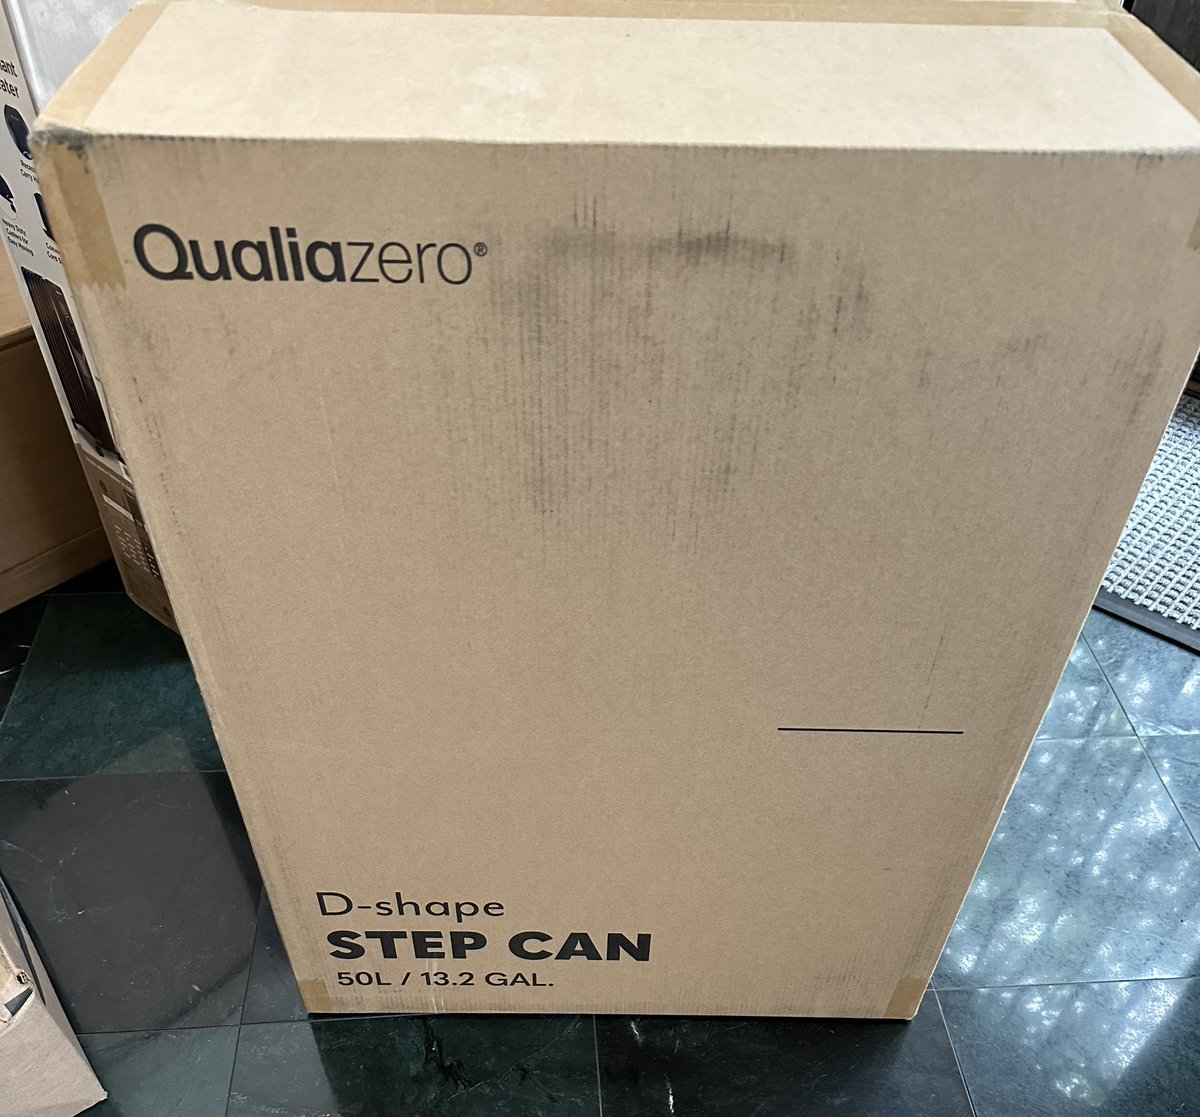 As an AI researcher, ordering a trash can and it coming from “Qualia zero” seems like something is telling me I am still in the Matrix.